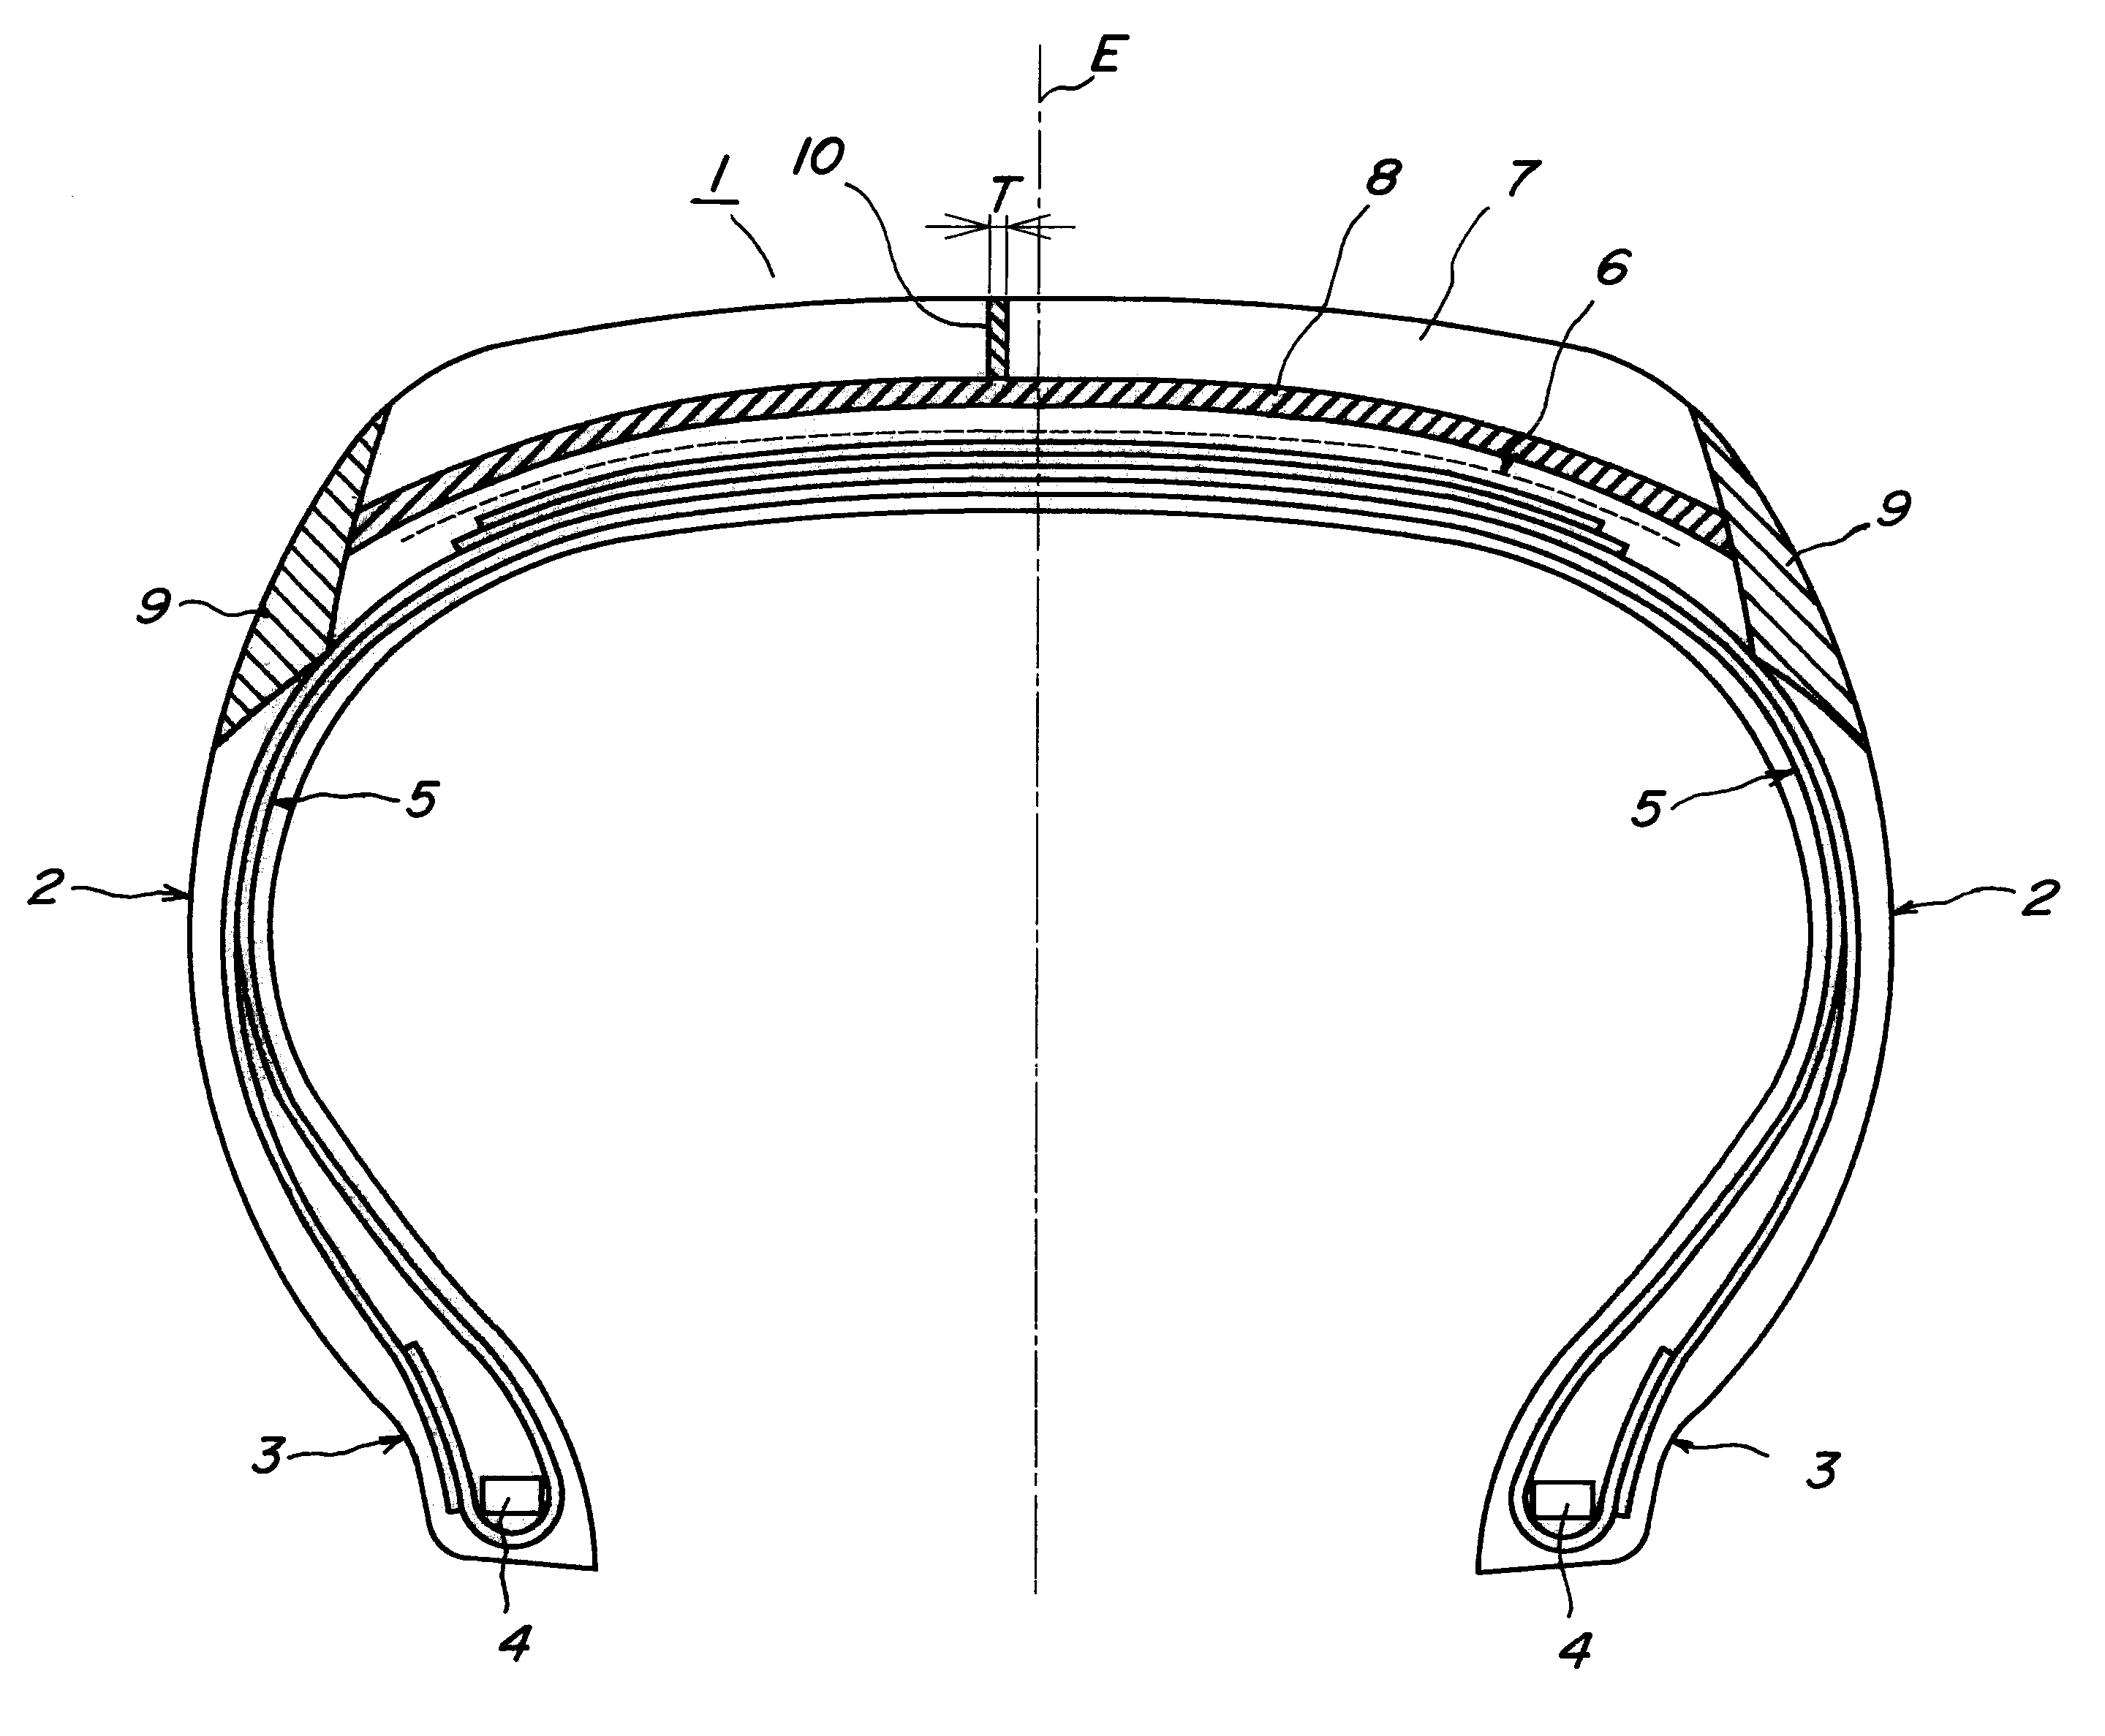 Pneumatic tire having electrically conductive rubber layer in land portion defined between circumferential grooves